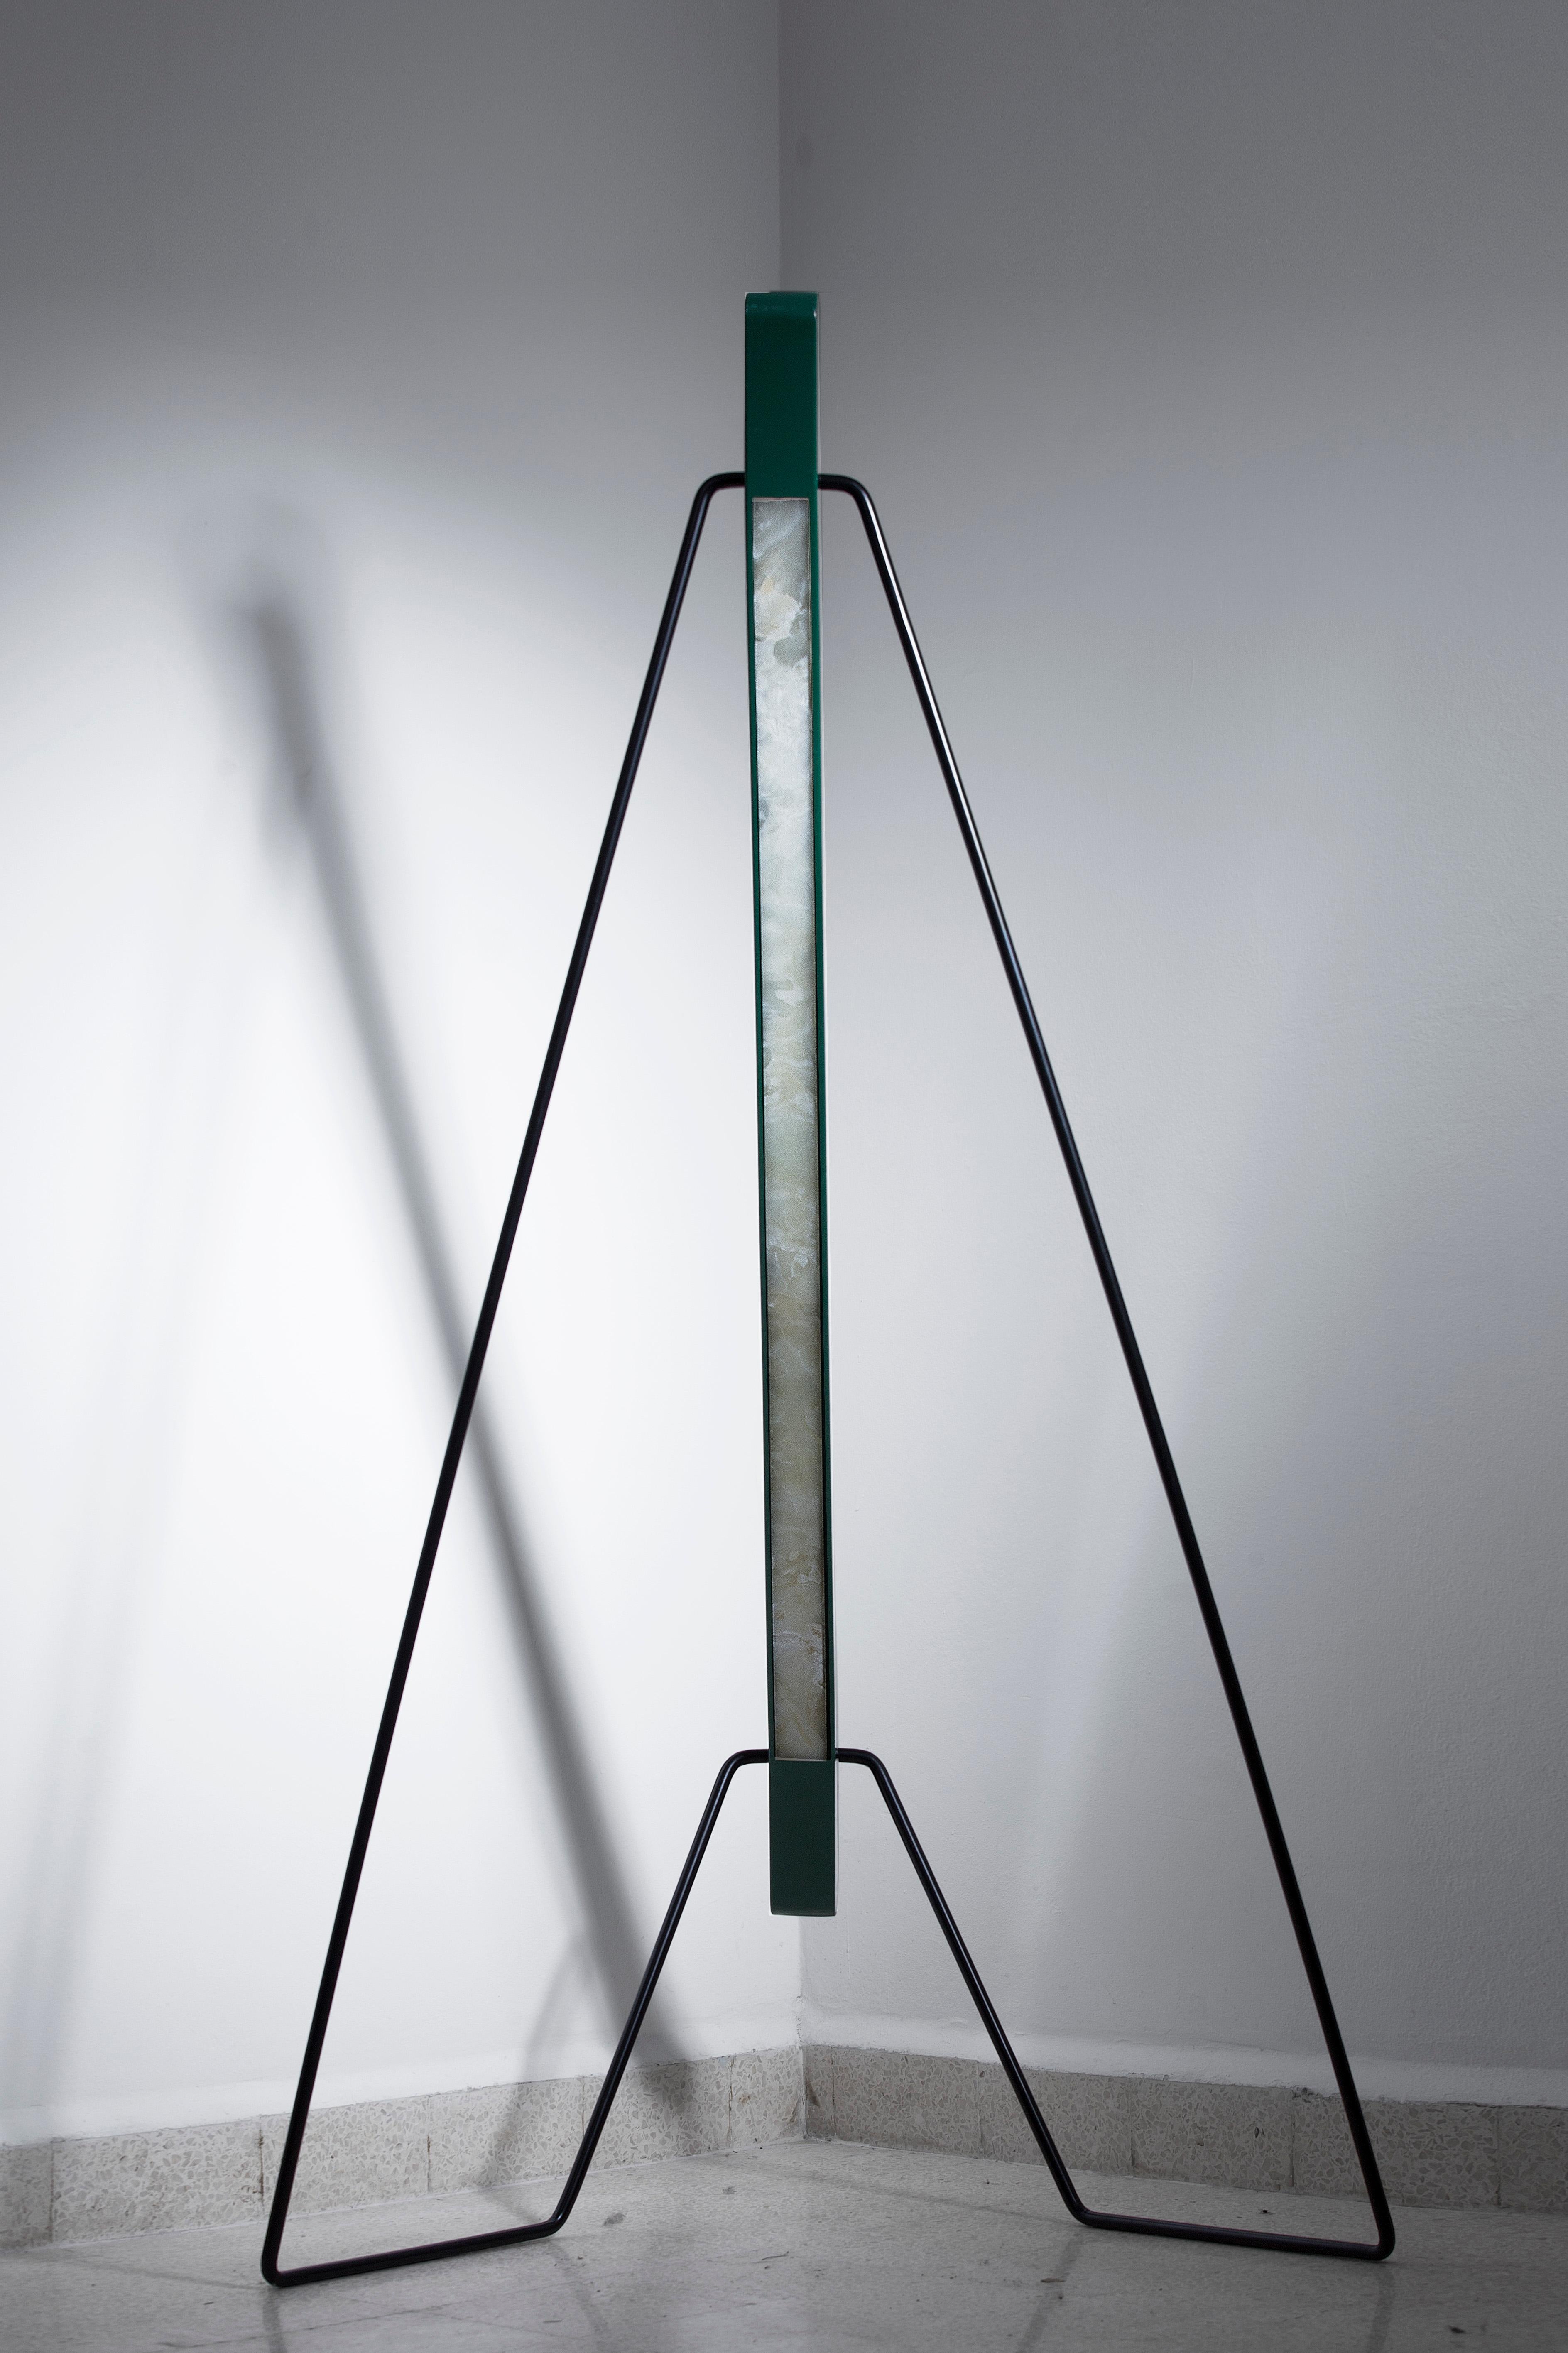 Bevel Floor Lamp by Borgi Bastormagi
Dimensions: 50 x 40 x 180 cm
Material: Steel, mirror, walnut wood

Bevel is a lighting piece that accentuates the corner condition with a linear accent light. With reflective marble,
Bevel communicates between